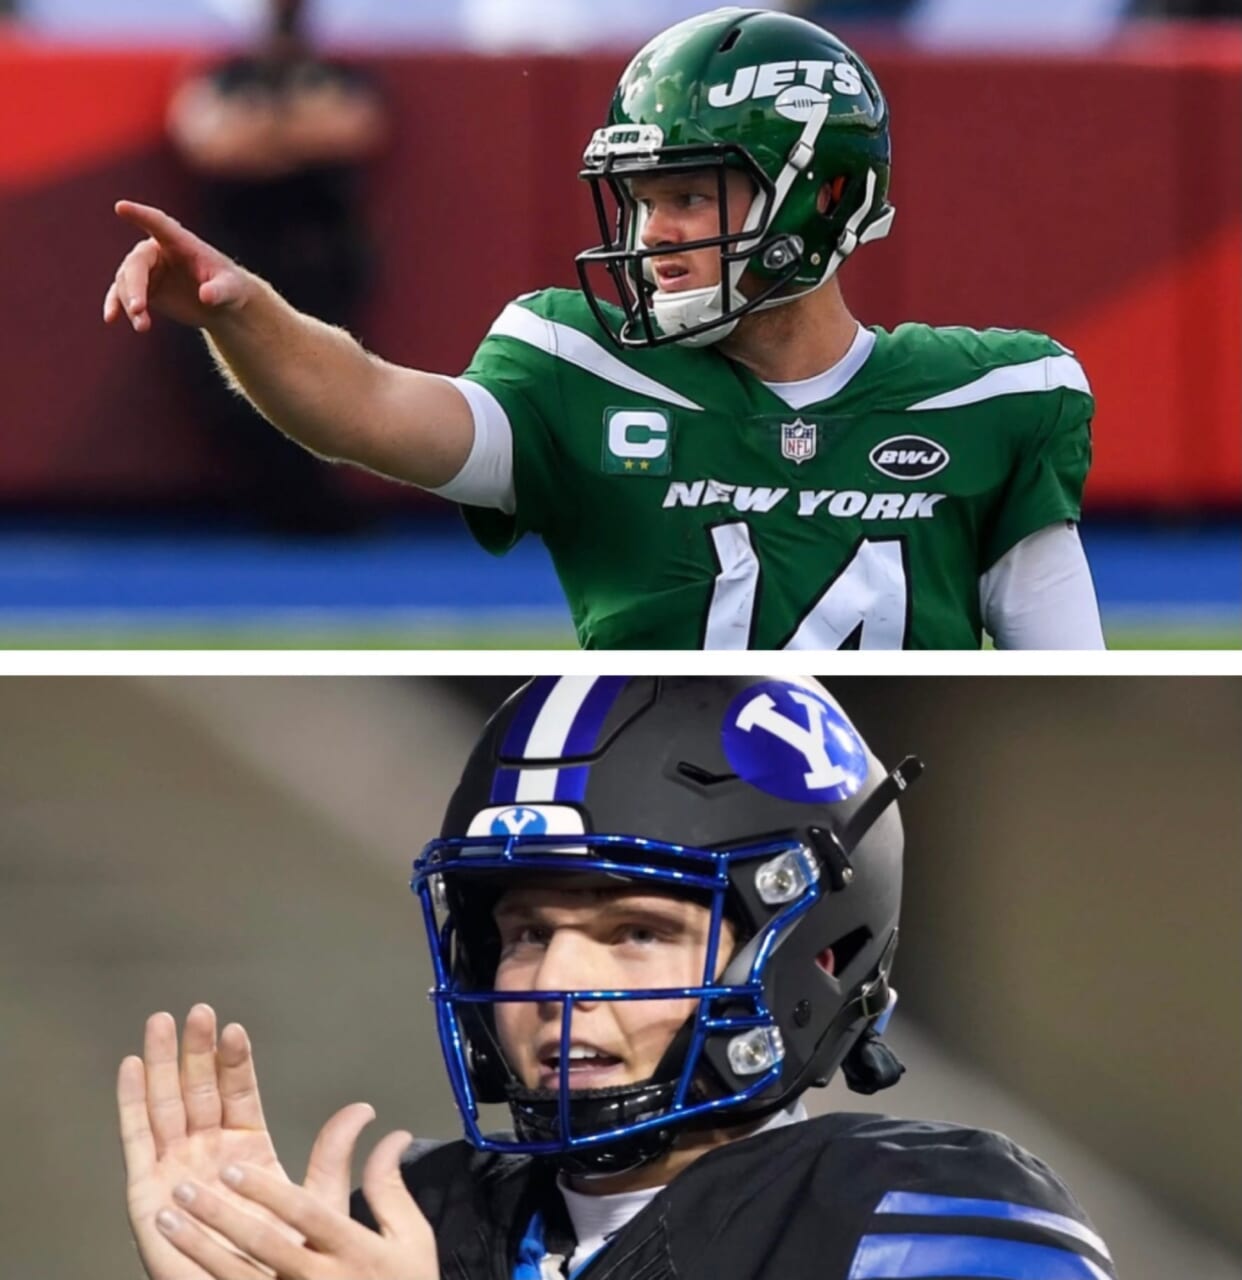 New York Jets: Sam Darnold and Zach Wilson can’t mix